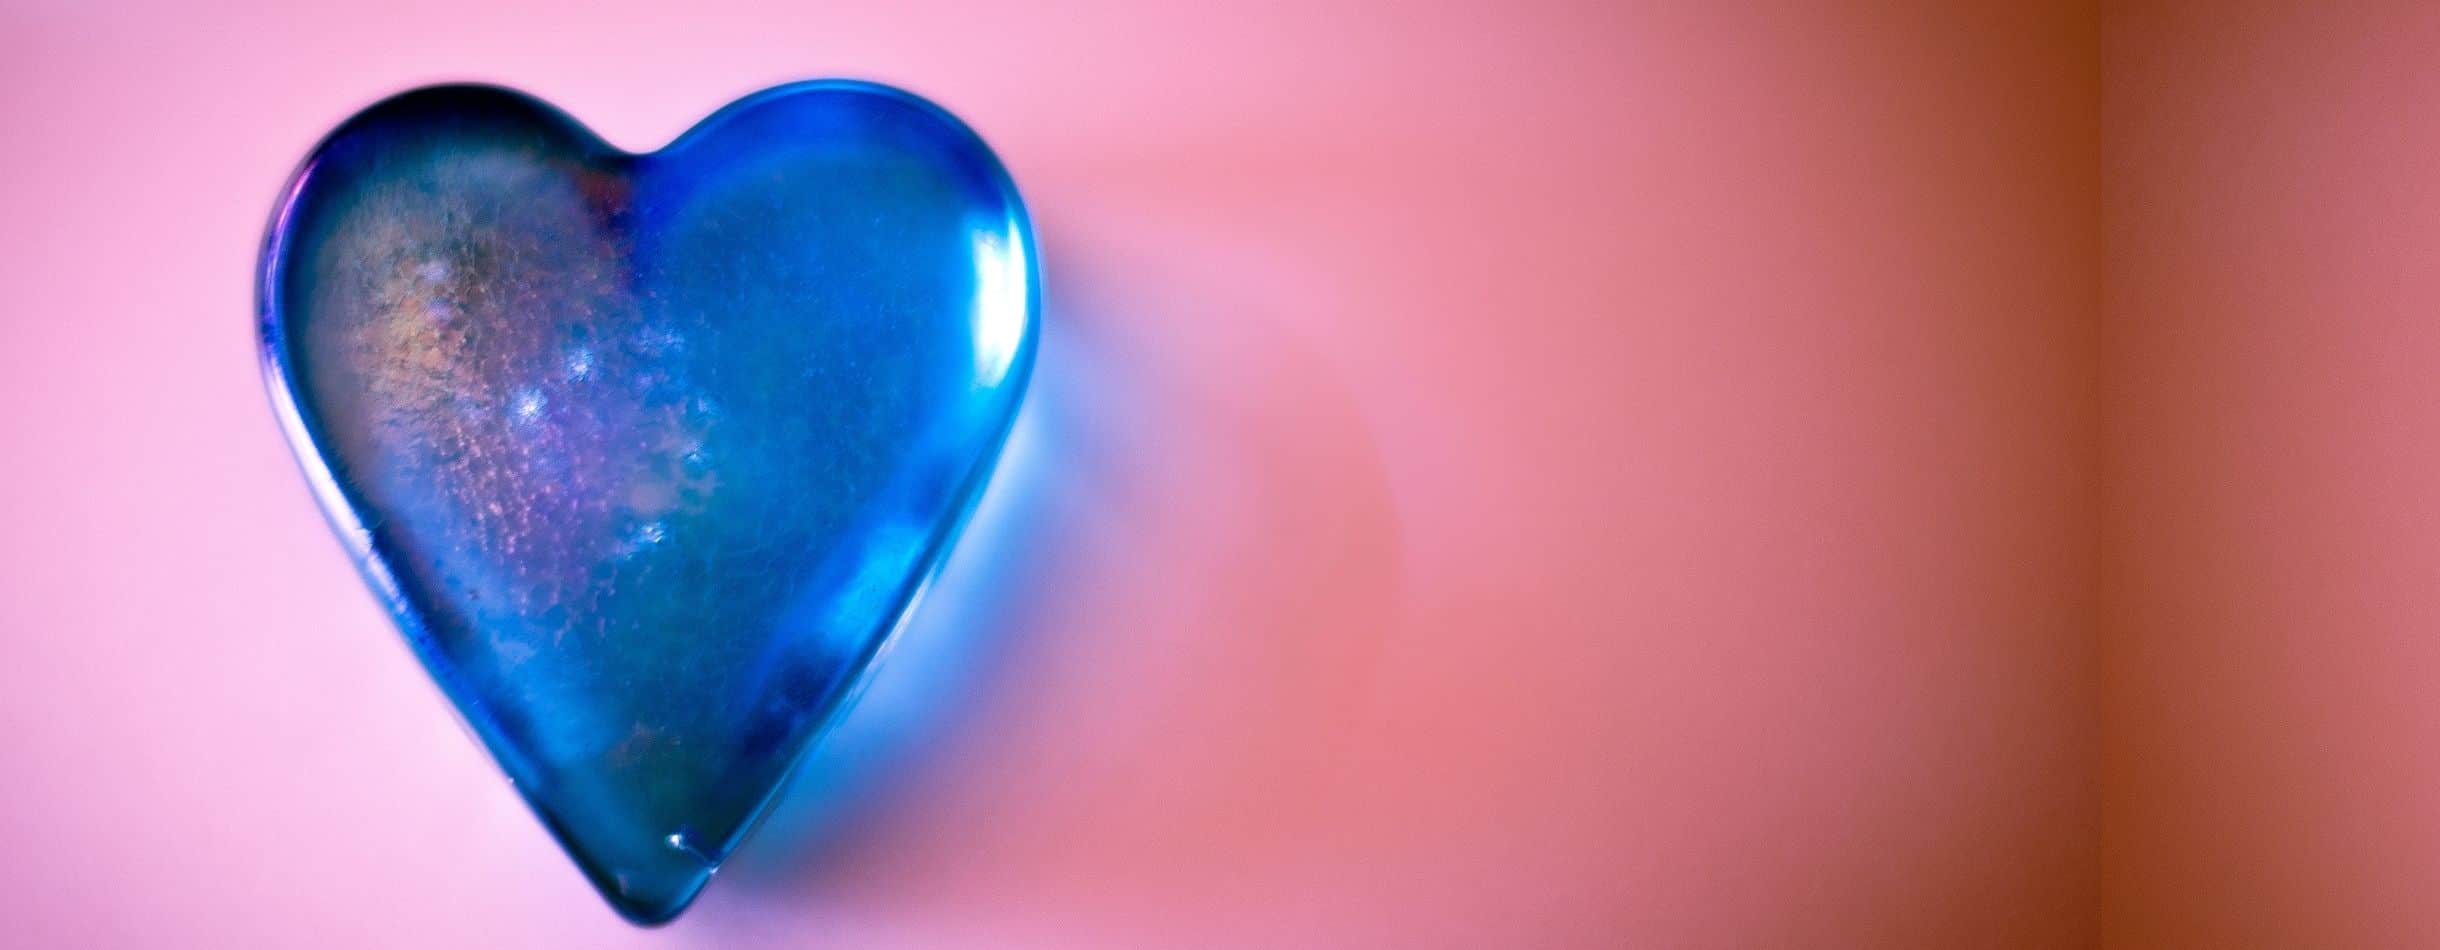 A blue heart lays on top of a red background